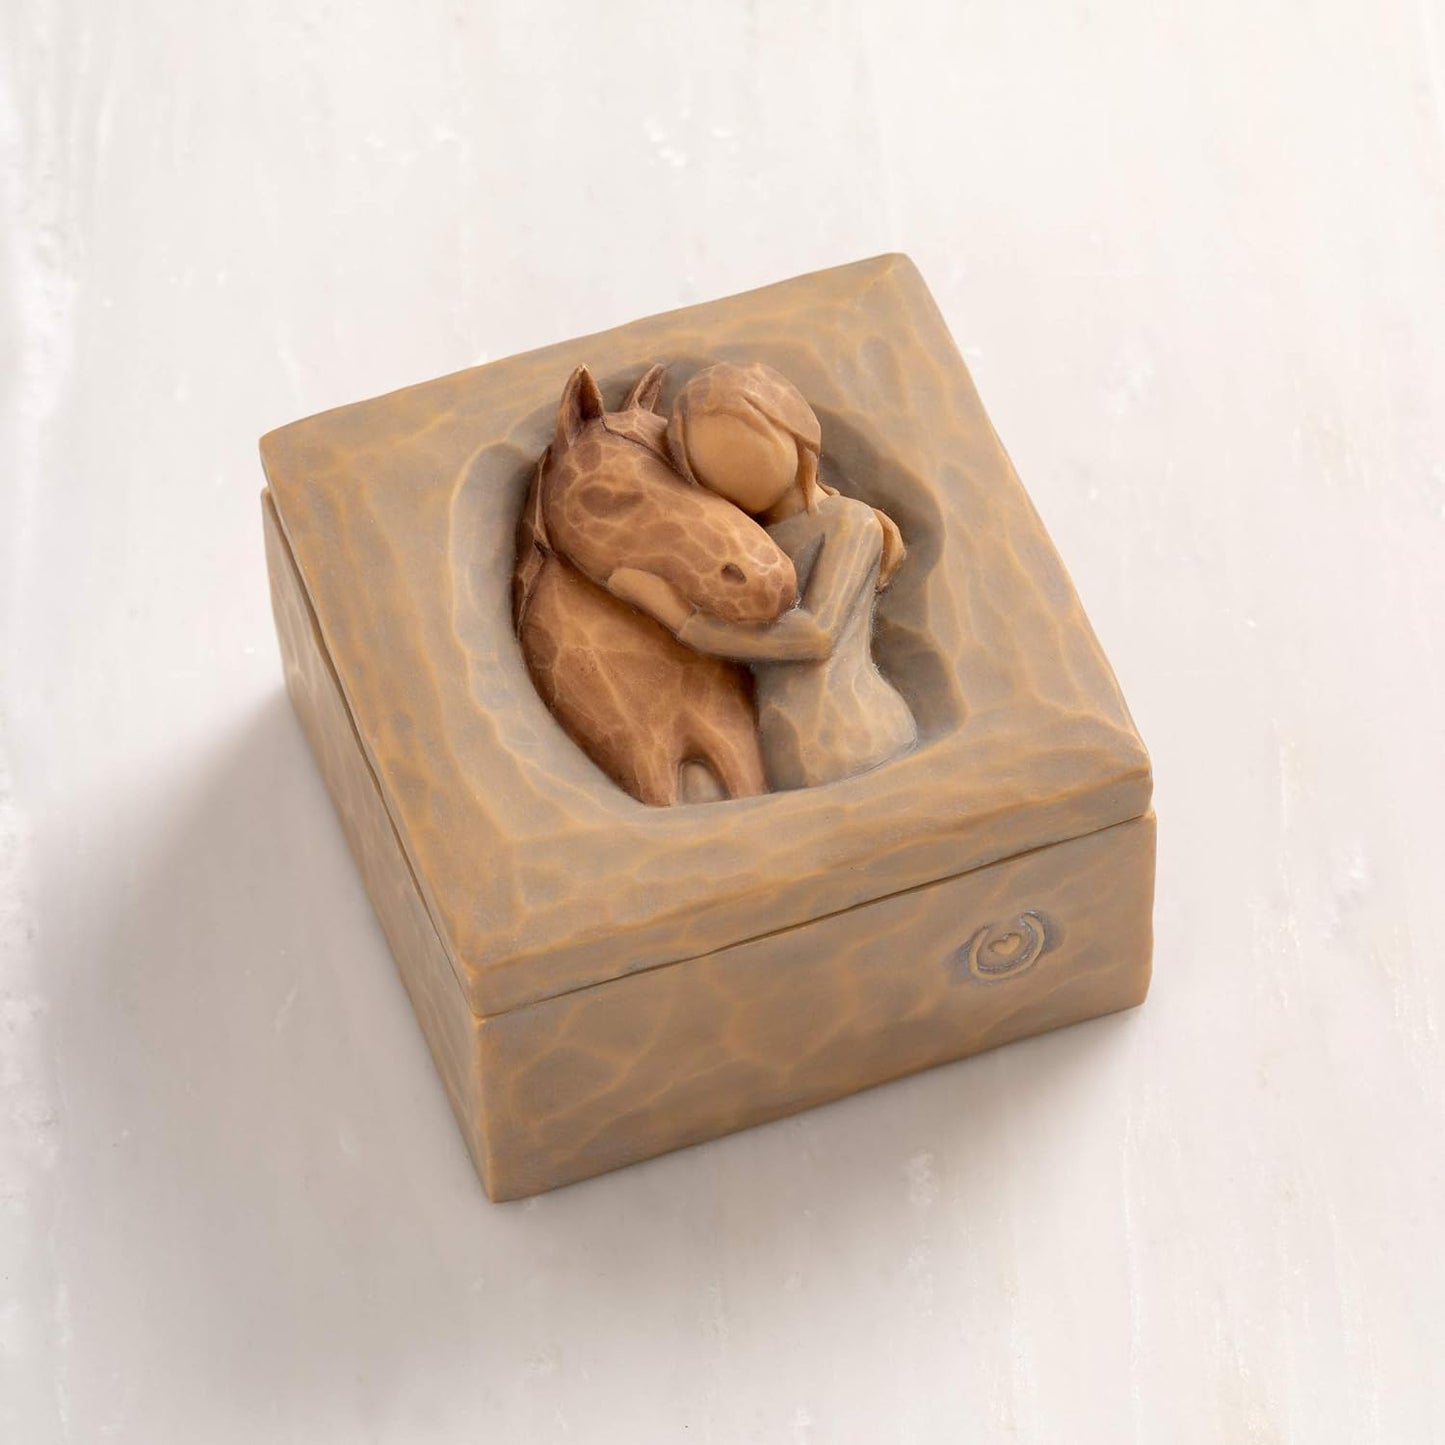 Whispers of Resilience: Hand-Painted Quiet Strength Keepsake Box. A Sculpted Tribute to Cherished Memories